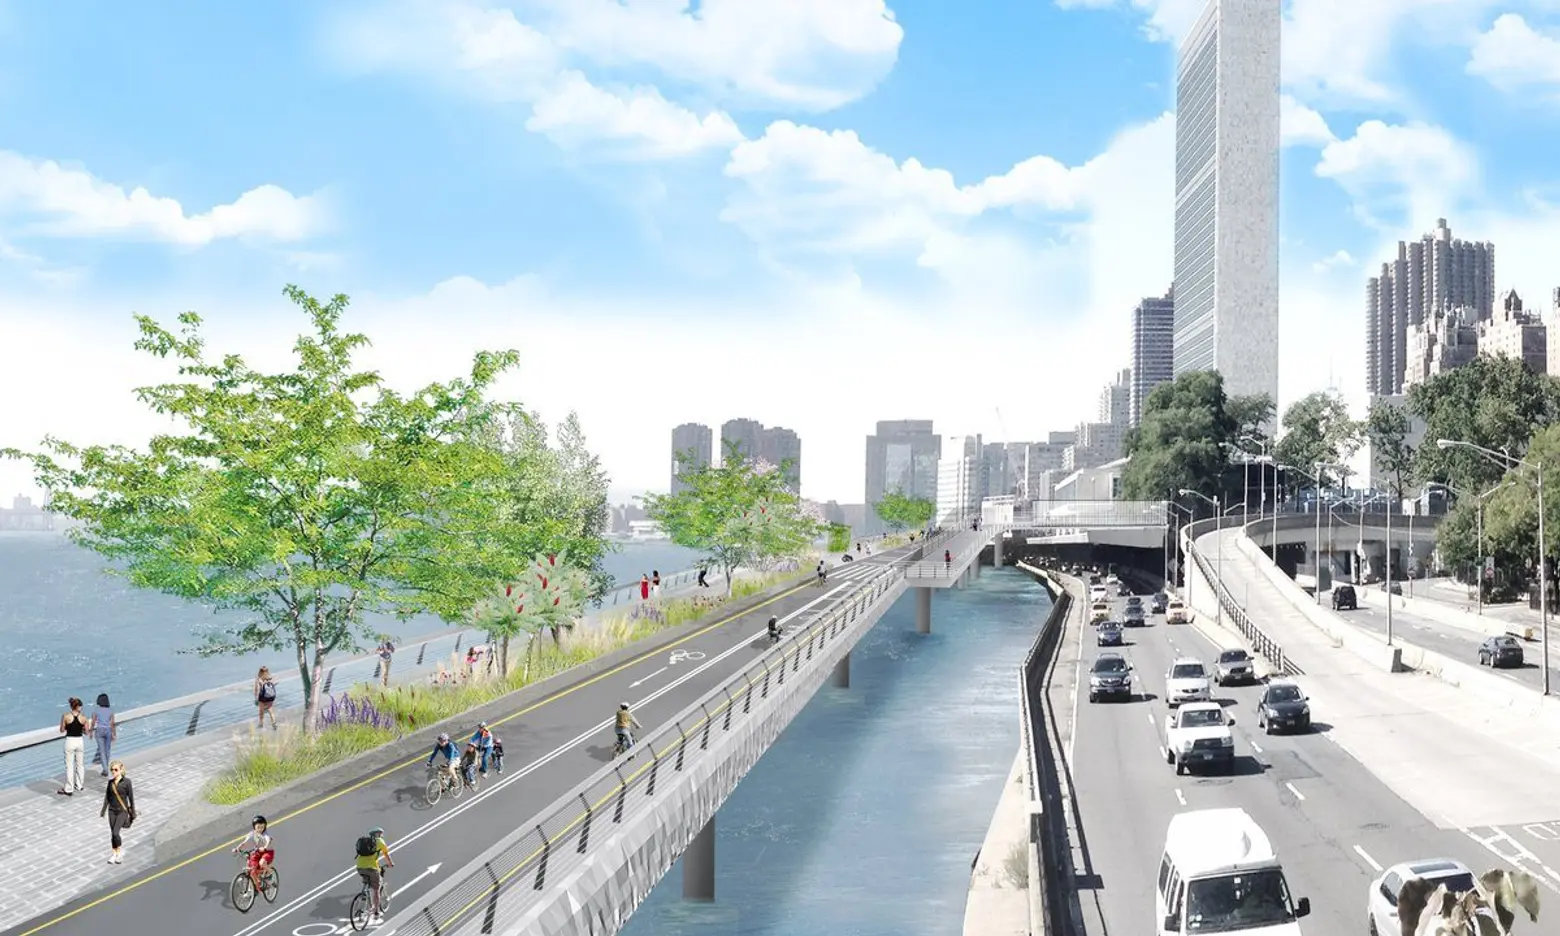 City will spend $100M on a new esplanade to close the gap along Manhattan’s East River greenway